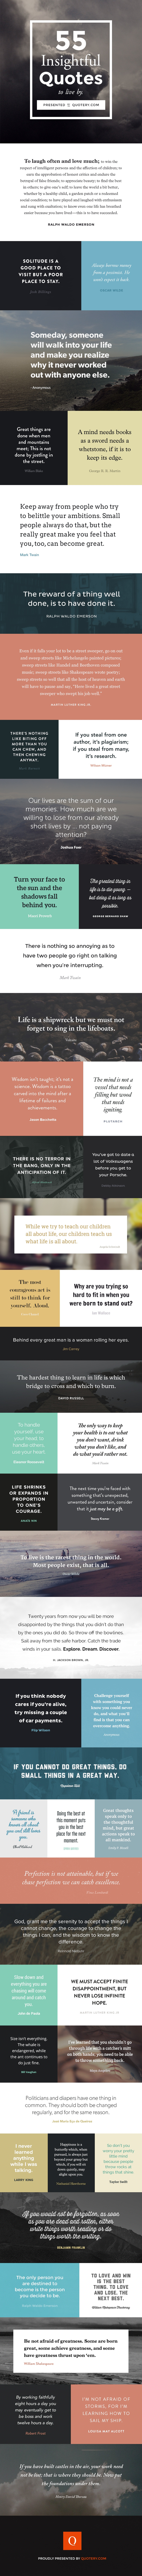 55-insightful-quotes-to-live-by-infographic